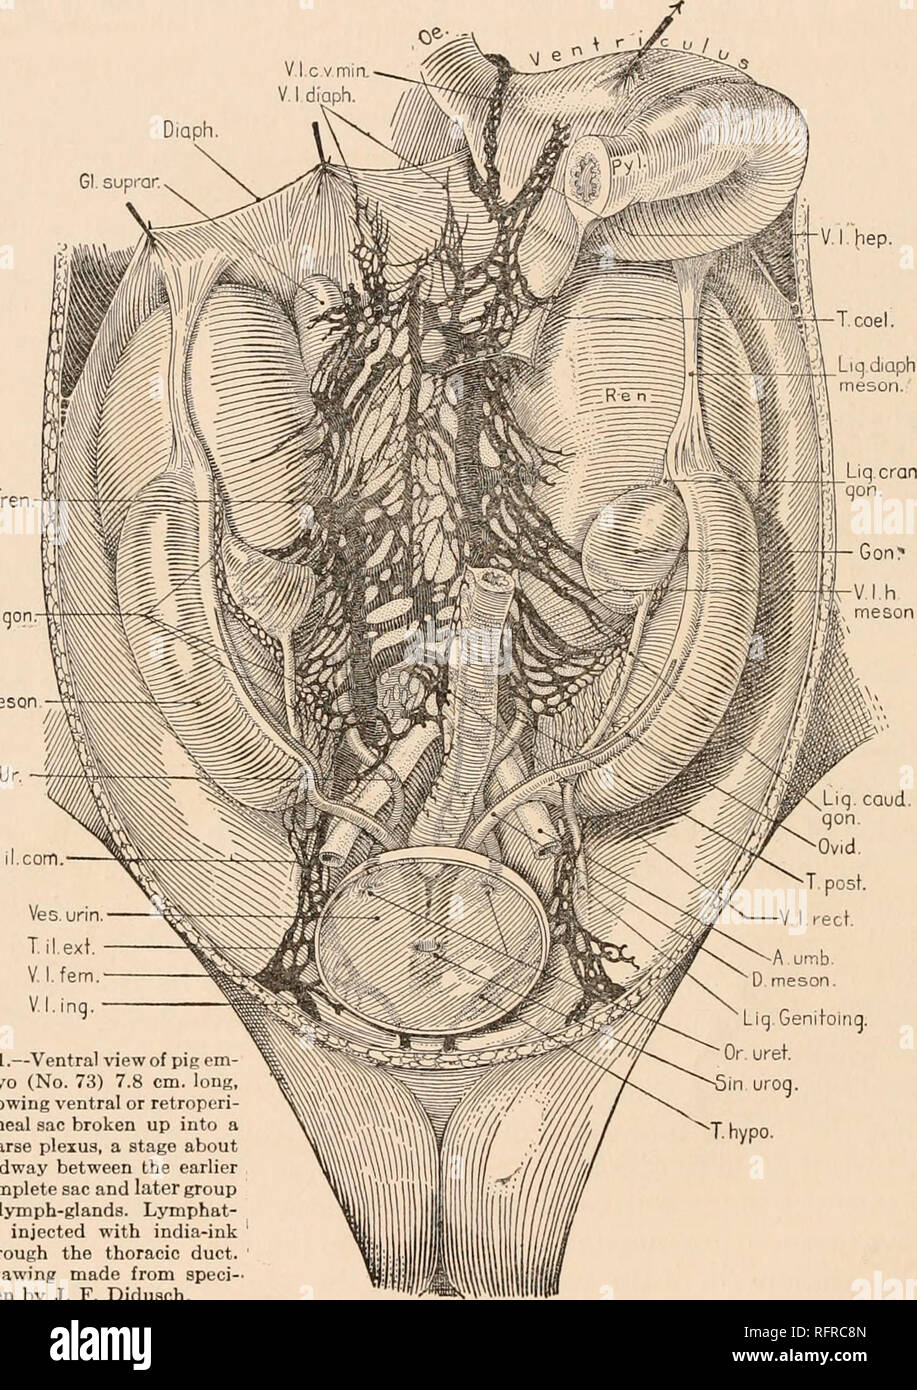 . Carnegie Institution of Washington publication. 22 FATE OP PRIMARY LYMPH-SACS IN ABDOMINAL REGION OF PIG, ETC. The large coeliac trunk (figs. 1 and 2, T. coel.) immediately divides into a right and a left branch, the latter soon breaking into the mesial trunk and the left trunk. The left trunk, which includes the gastro-splenic trunk, is not shown in figure 1, being on the other side of the fold of mesentery, but it can be well seen in figure 3. The mass of lymphatics at the anterior end of the retroperitoneal sac courses cephalad for a short distance and then turns ventrally, breaking up in Stock Photo